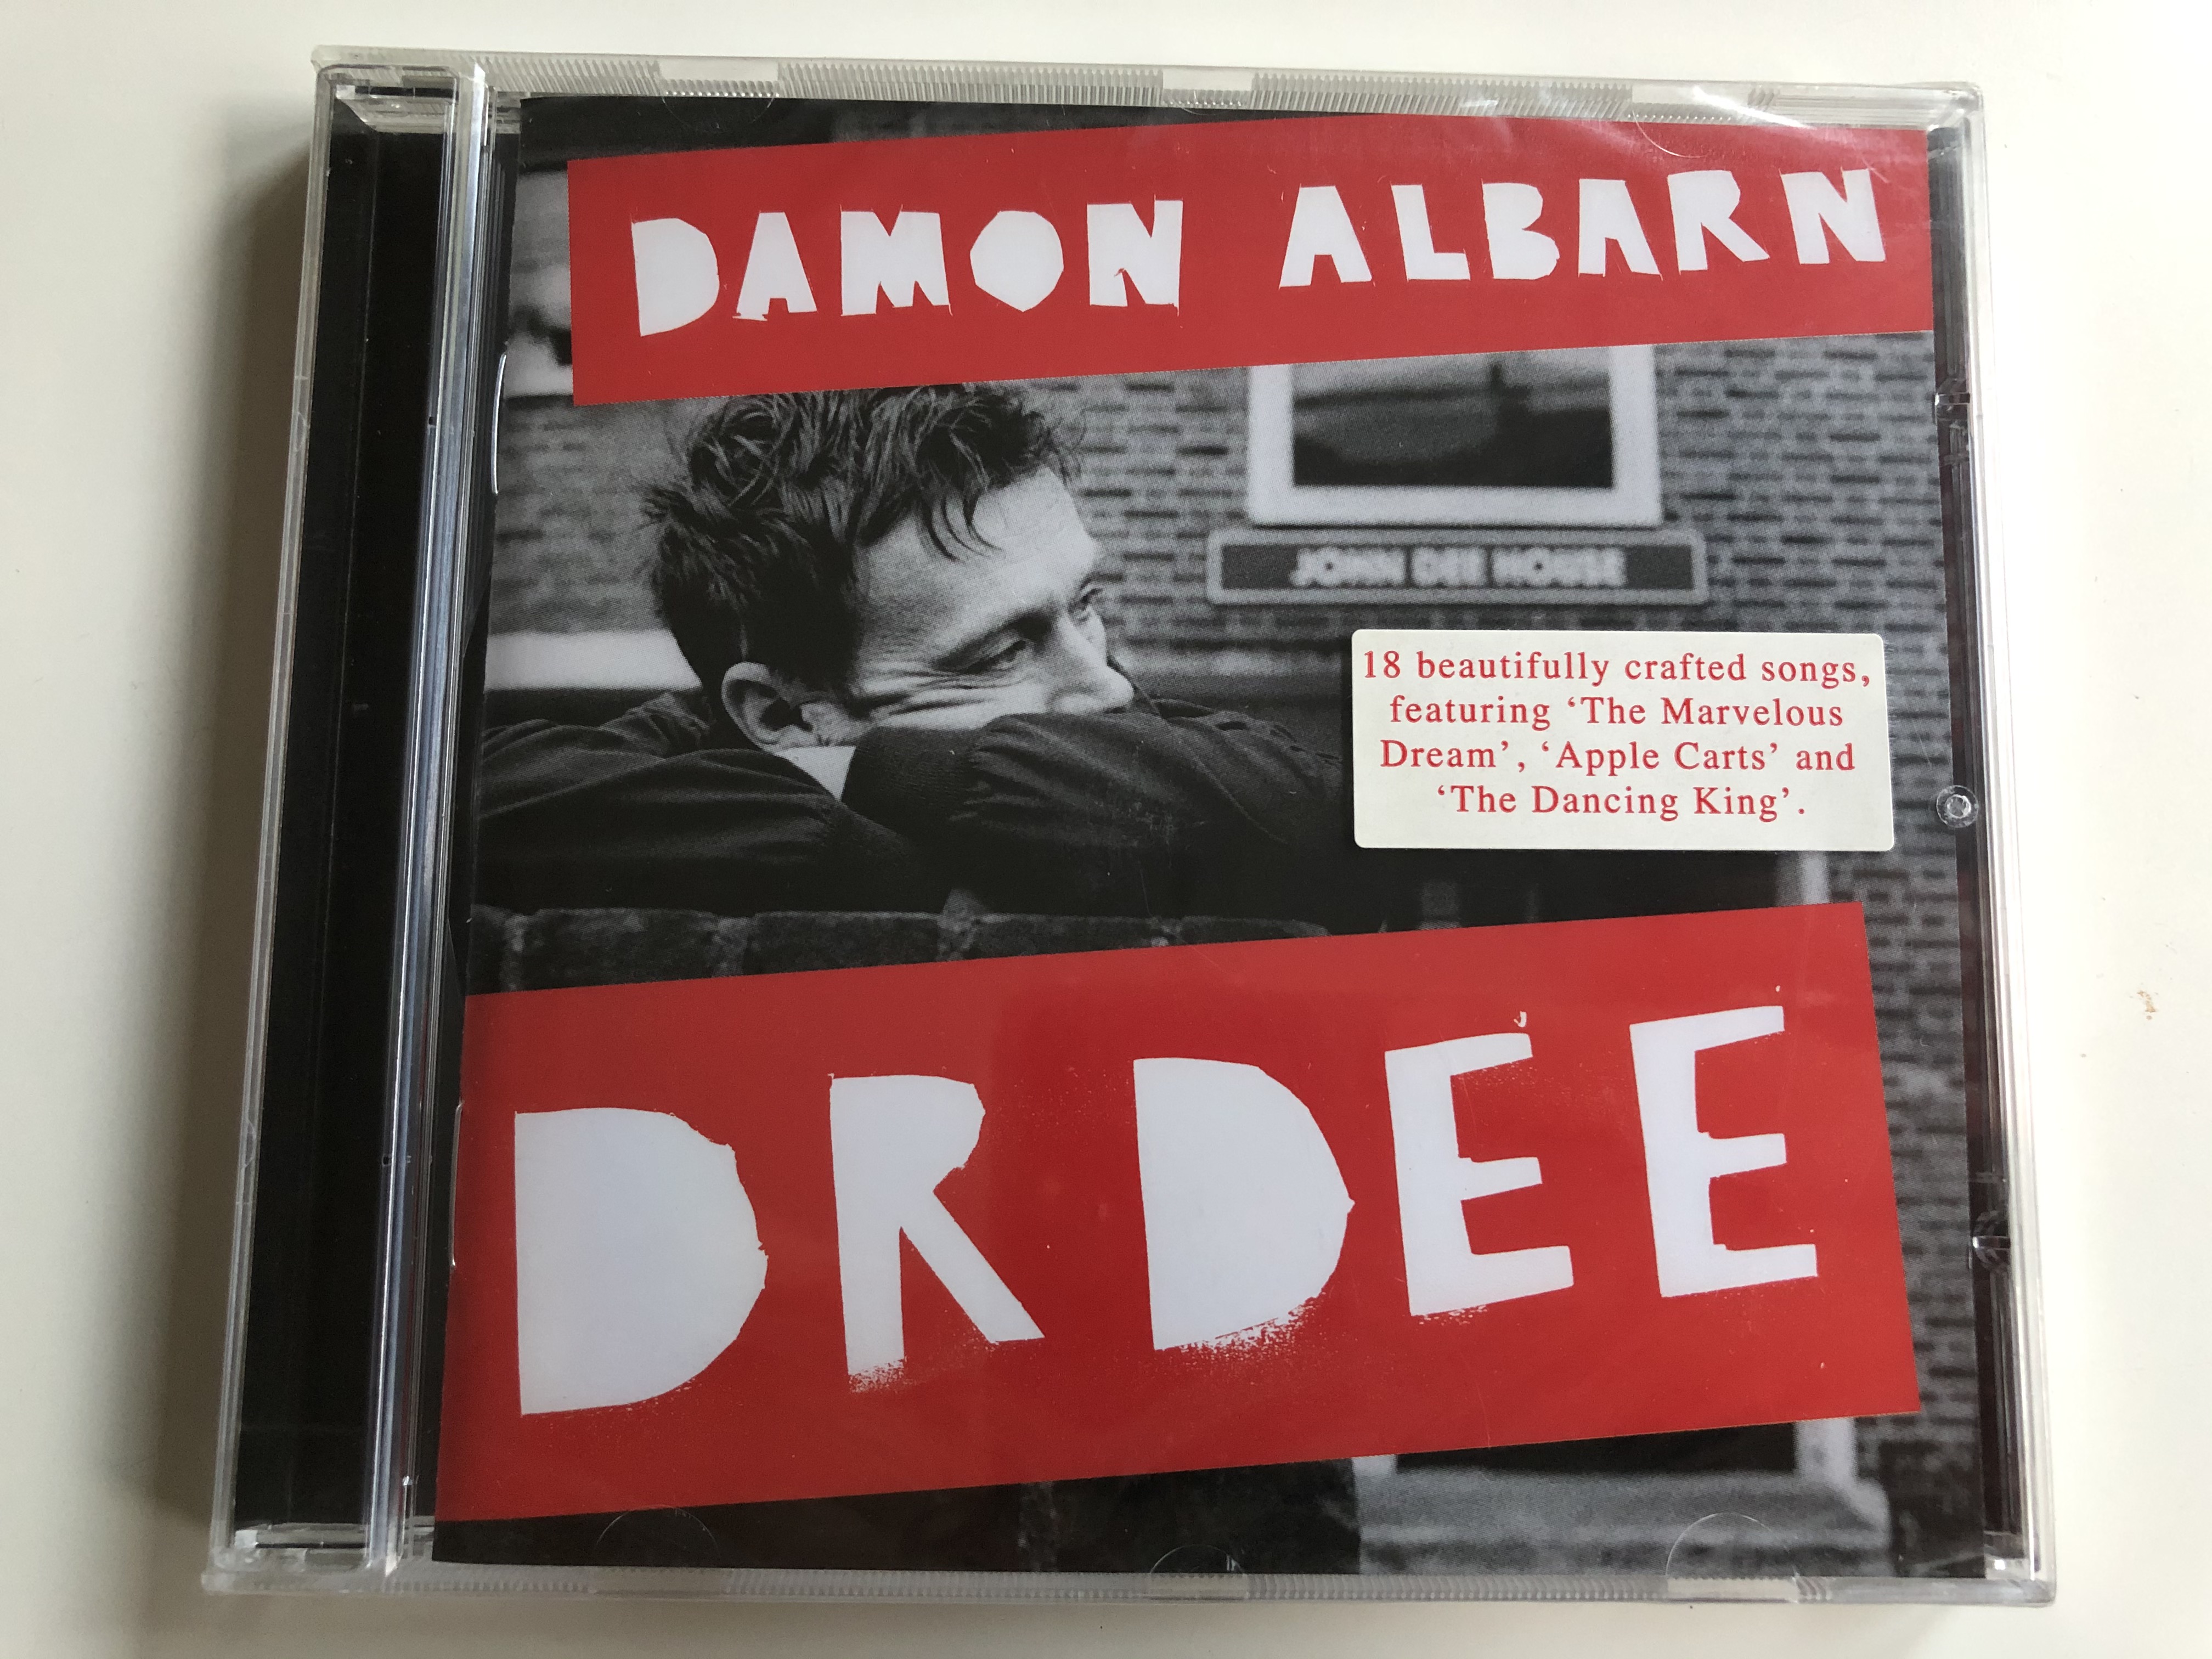 damon-albarn-dr-dee-18-beautifully-crafted-songs-featuring-the-marvelous-dream-apple-carts-and-the-dancing-king-parlophone-audio-cd-2012-p9538932-1-.jpg